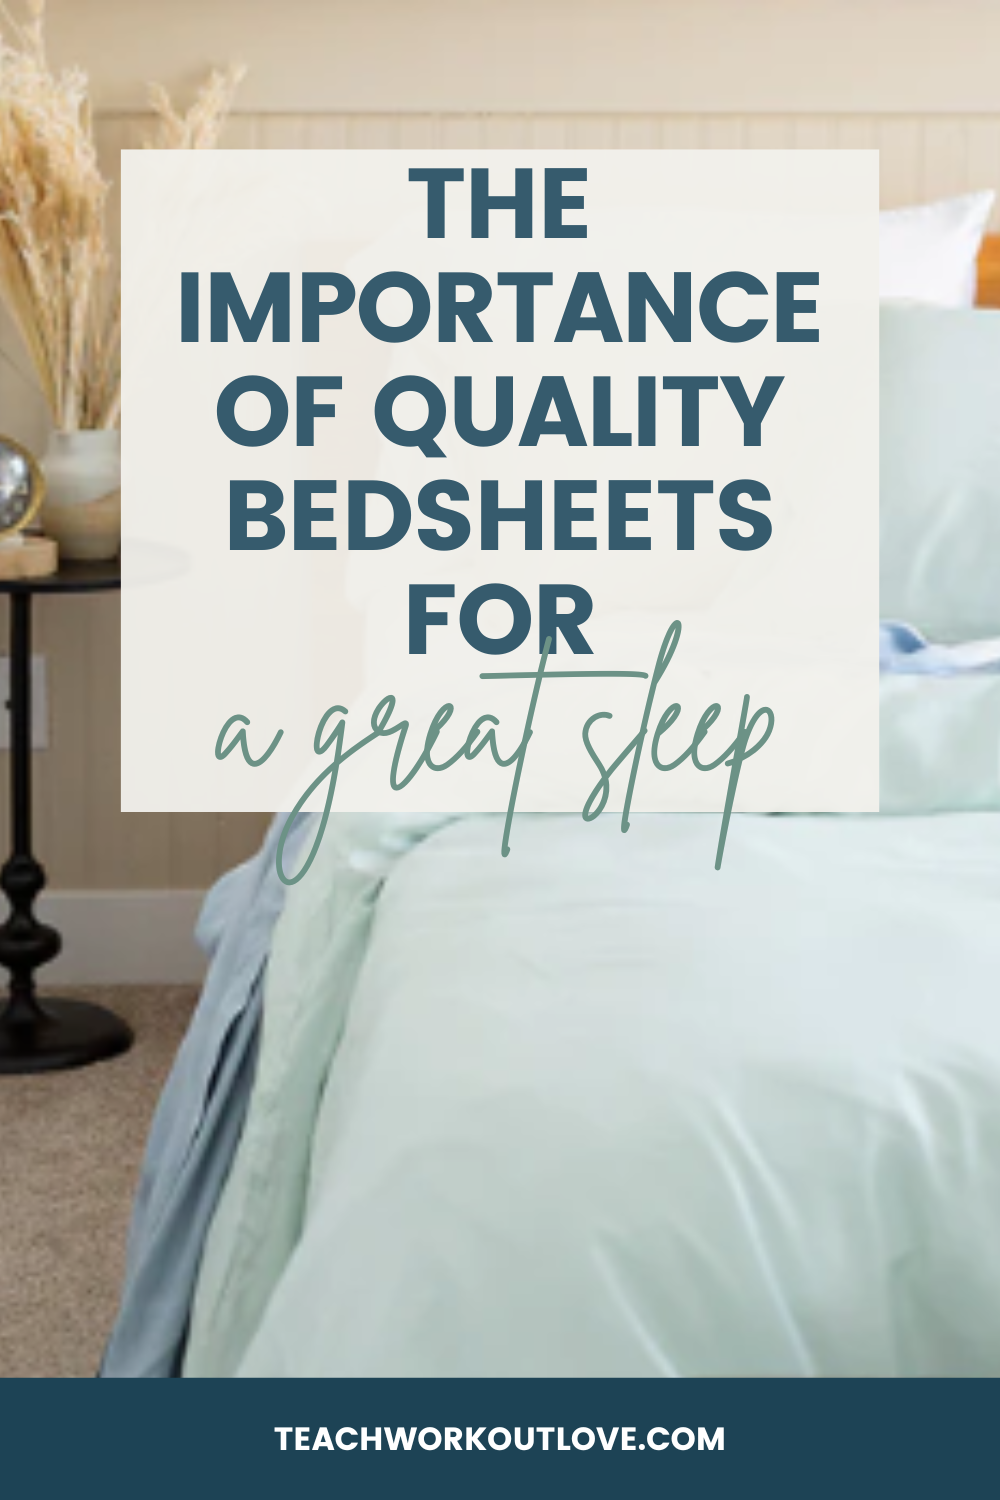 The Importance of the Right Bedsheets for a Good Night’s Sleep